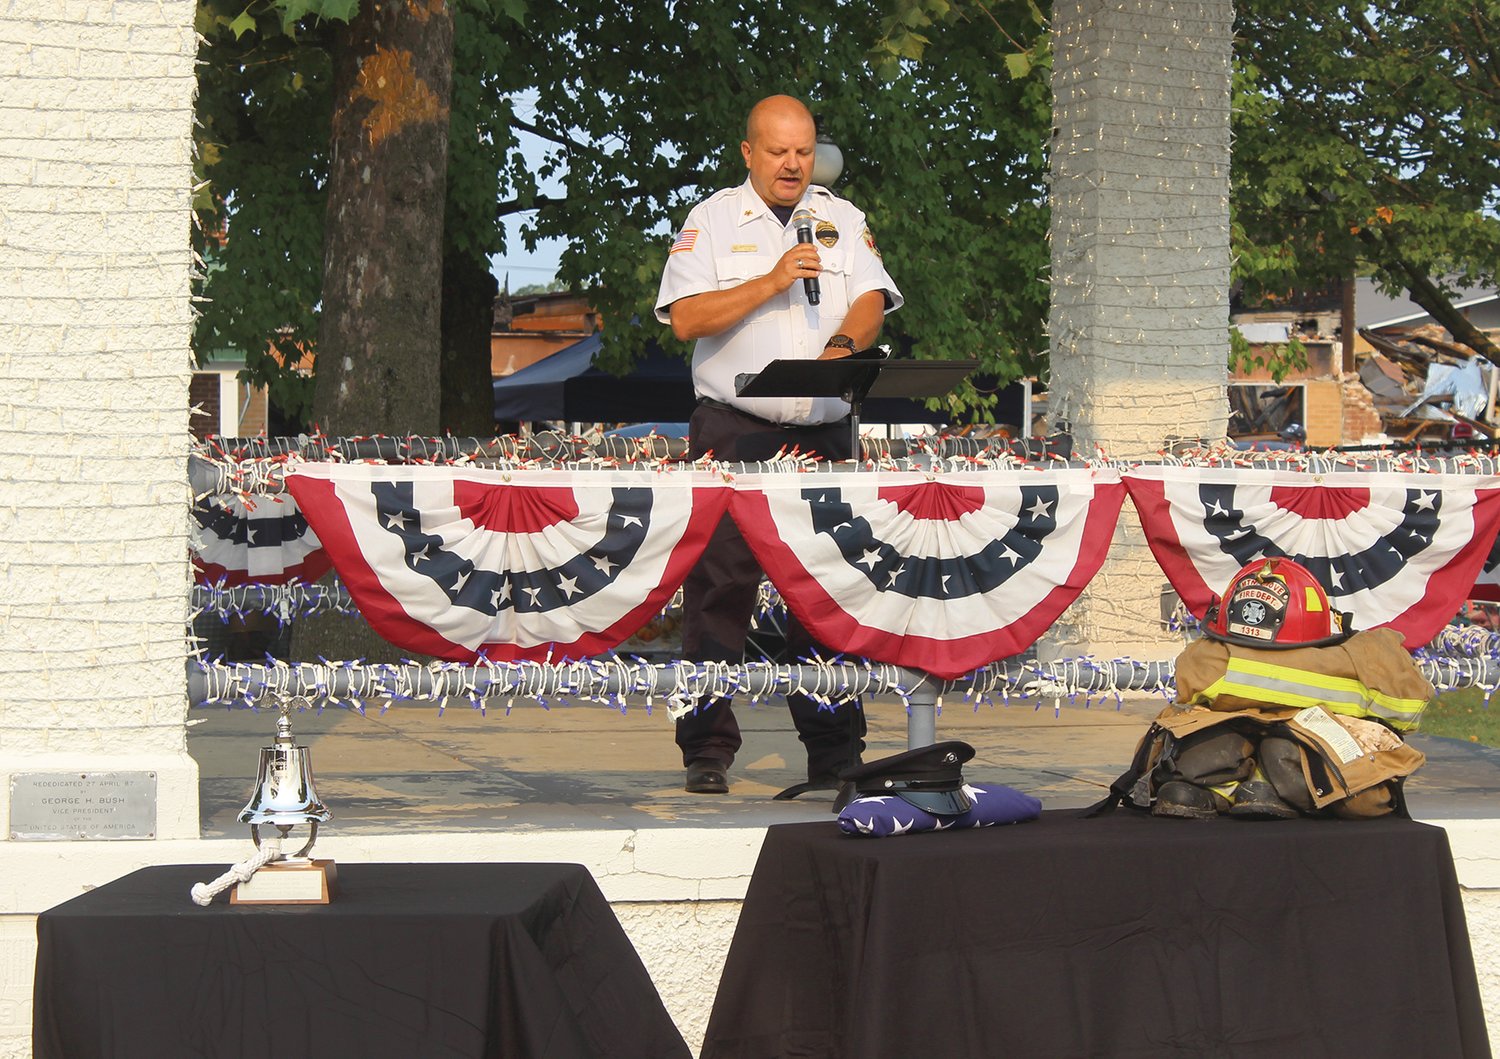 Mountain Grove Fire Chief Mark Bushong reads names off a list of emergency personnel who died during the Sep. 11, 2001 tragedy at the World Trade Center.